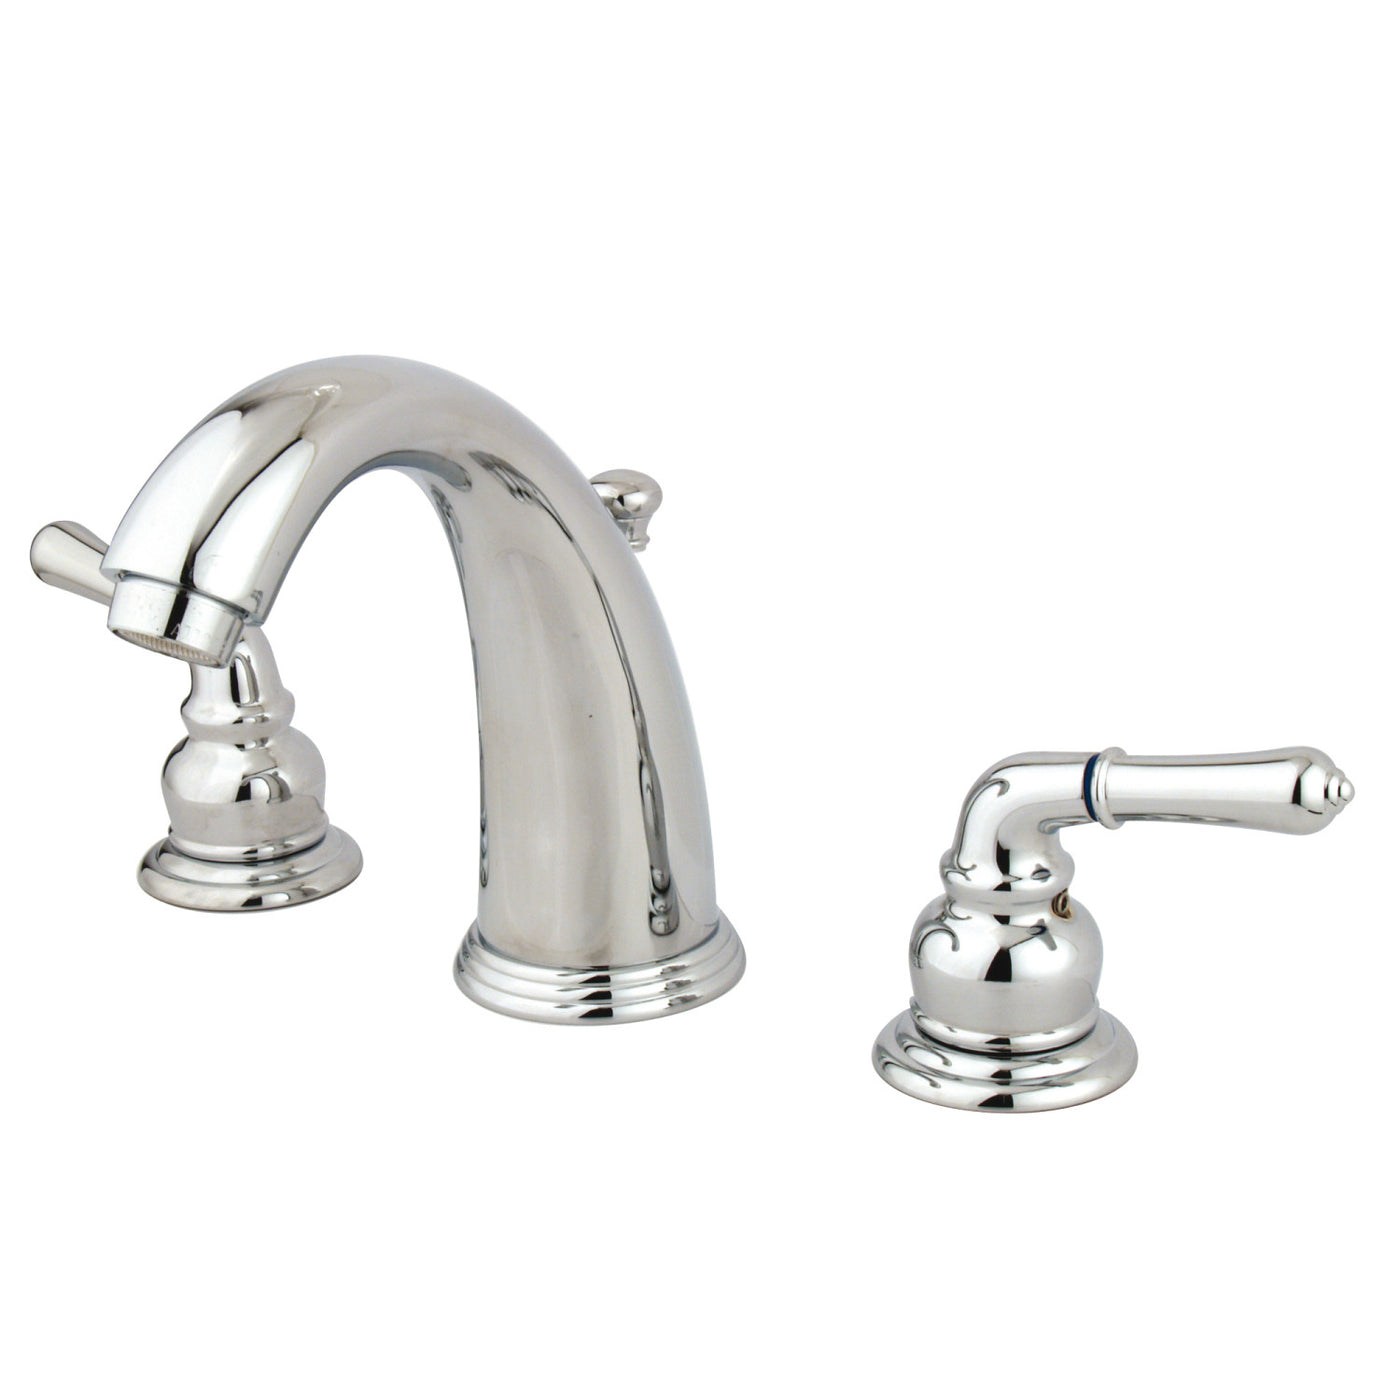 Elements of Design EB981 Widespread Bathroom Faucet with Retail Pop-Up, Polished Chrome